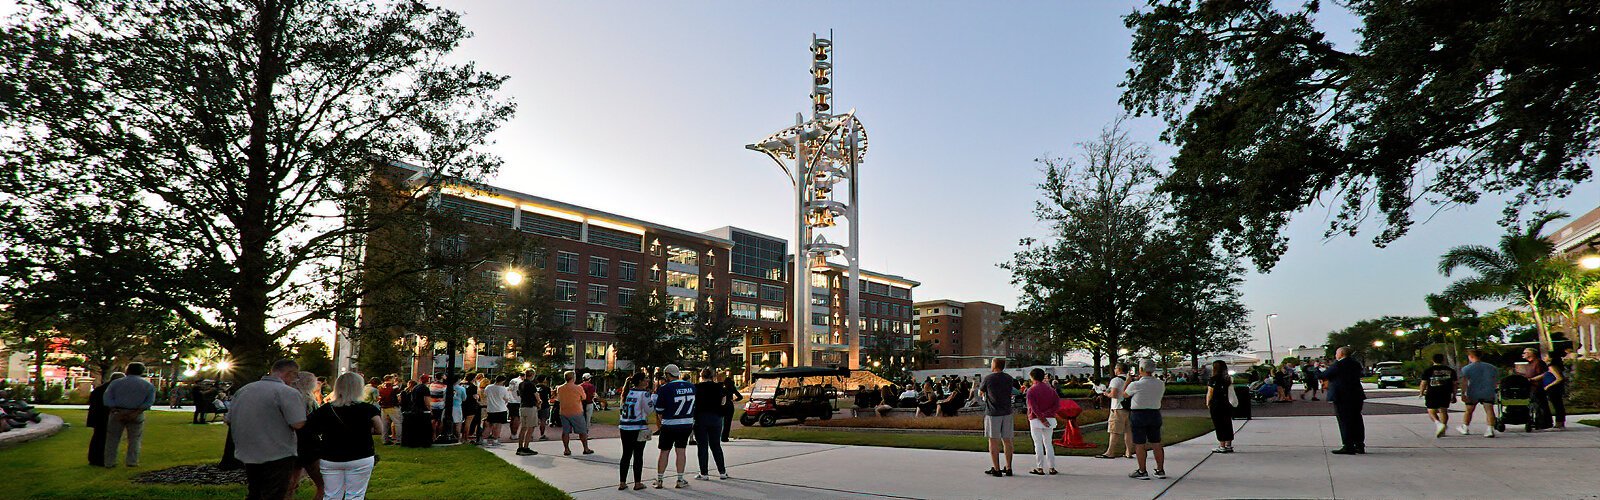 Saturday October 8th was the dedication concert of the Ars Sonora bell sculpture at the University of Tampa in Tampa. Public concerts are planned for the future.